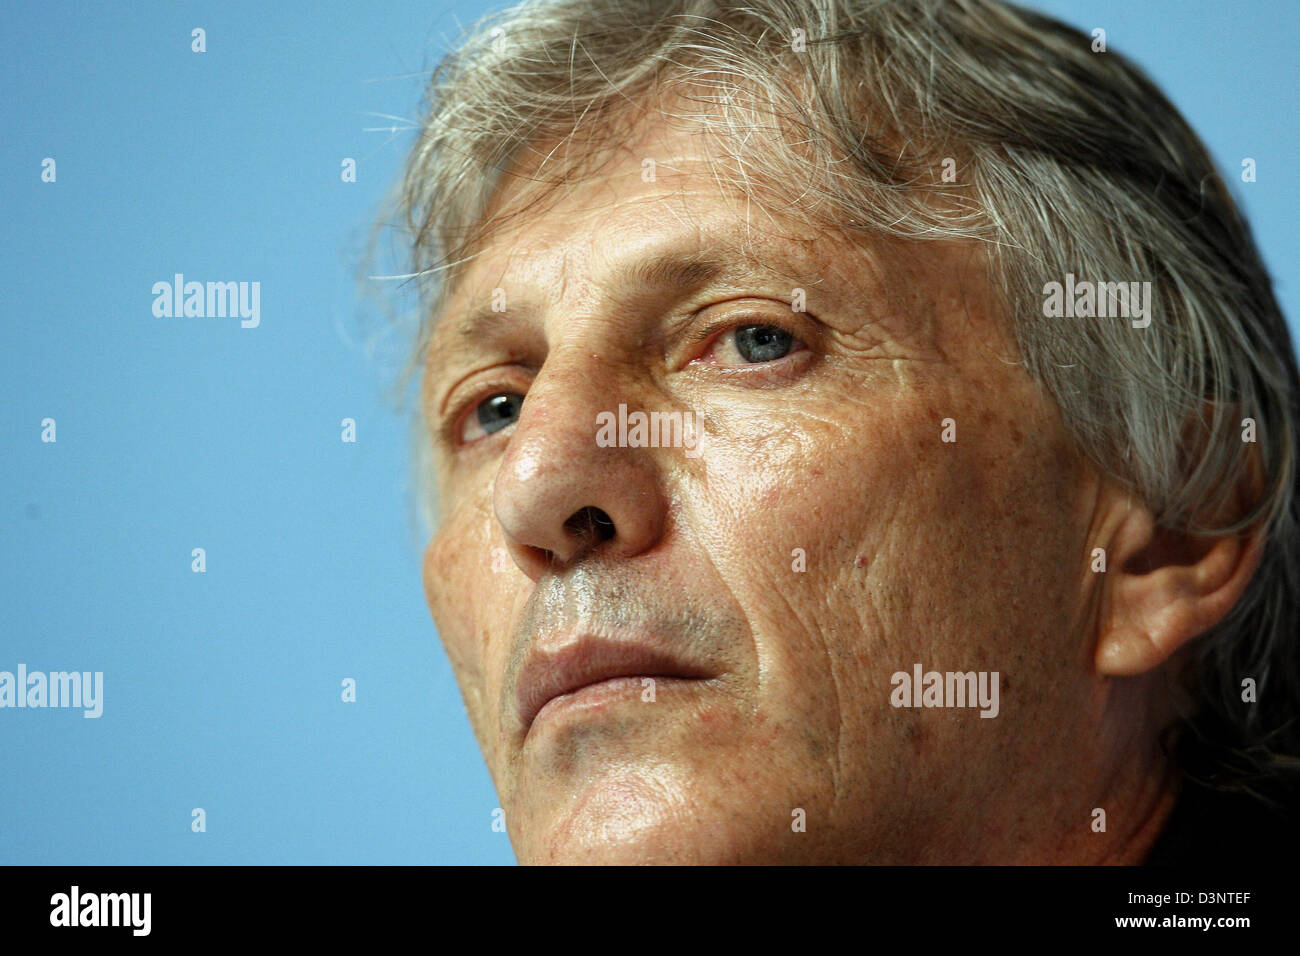 Argentine national soccer team head coach Jose Pekerman is pictured during a press conference in Herzogenaurach, Germany, Thursday, 29 June 2006. Argentina will face host Germany during the FIFA World Cup 2006 quarter-final in Berlin coming Friday. Photo: Daniel Karmann Stock Photo